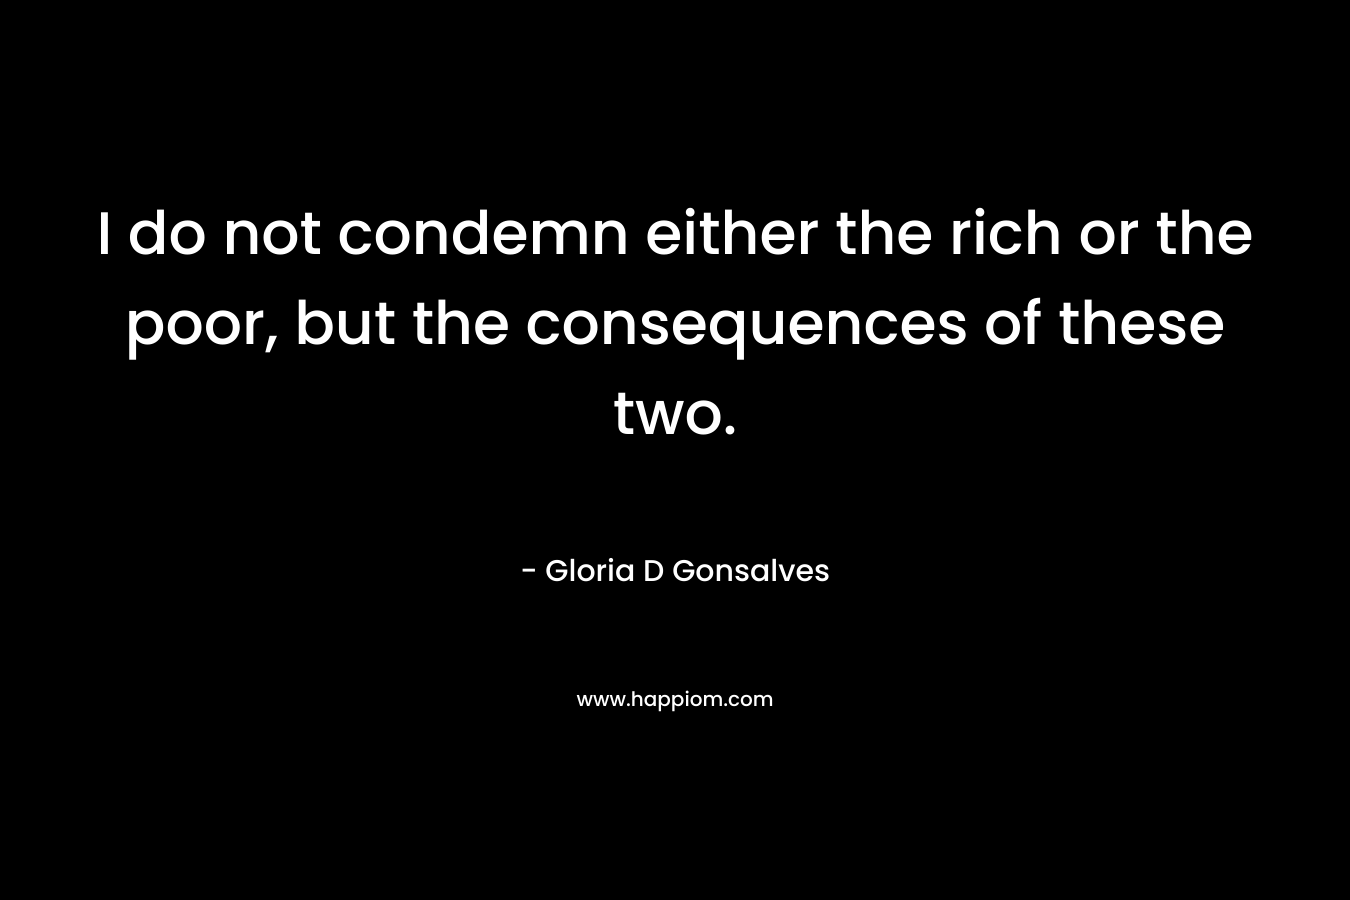 I do not condemn either the rich or the poor, but the consequences of these two.